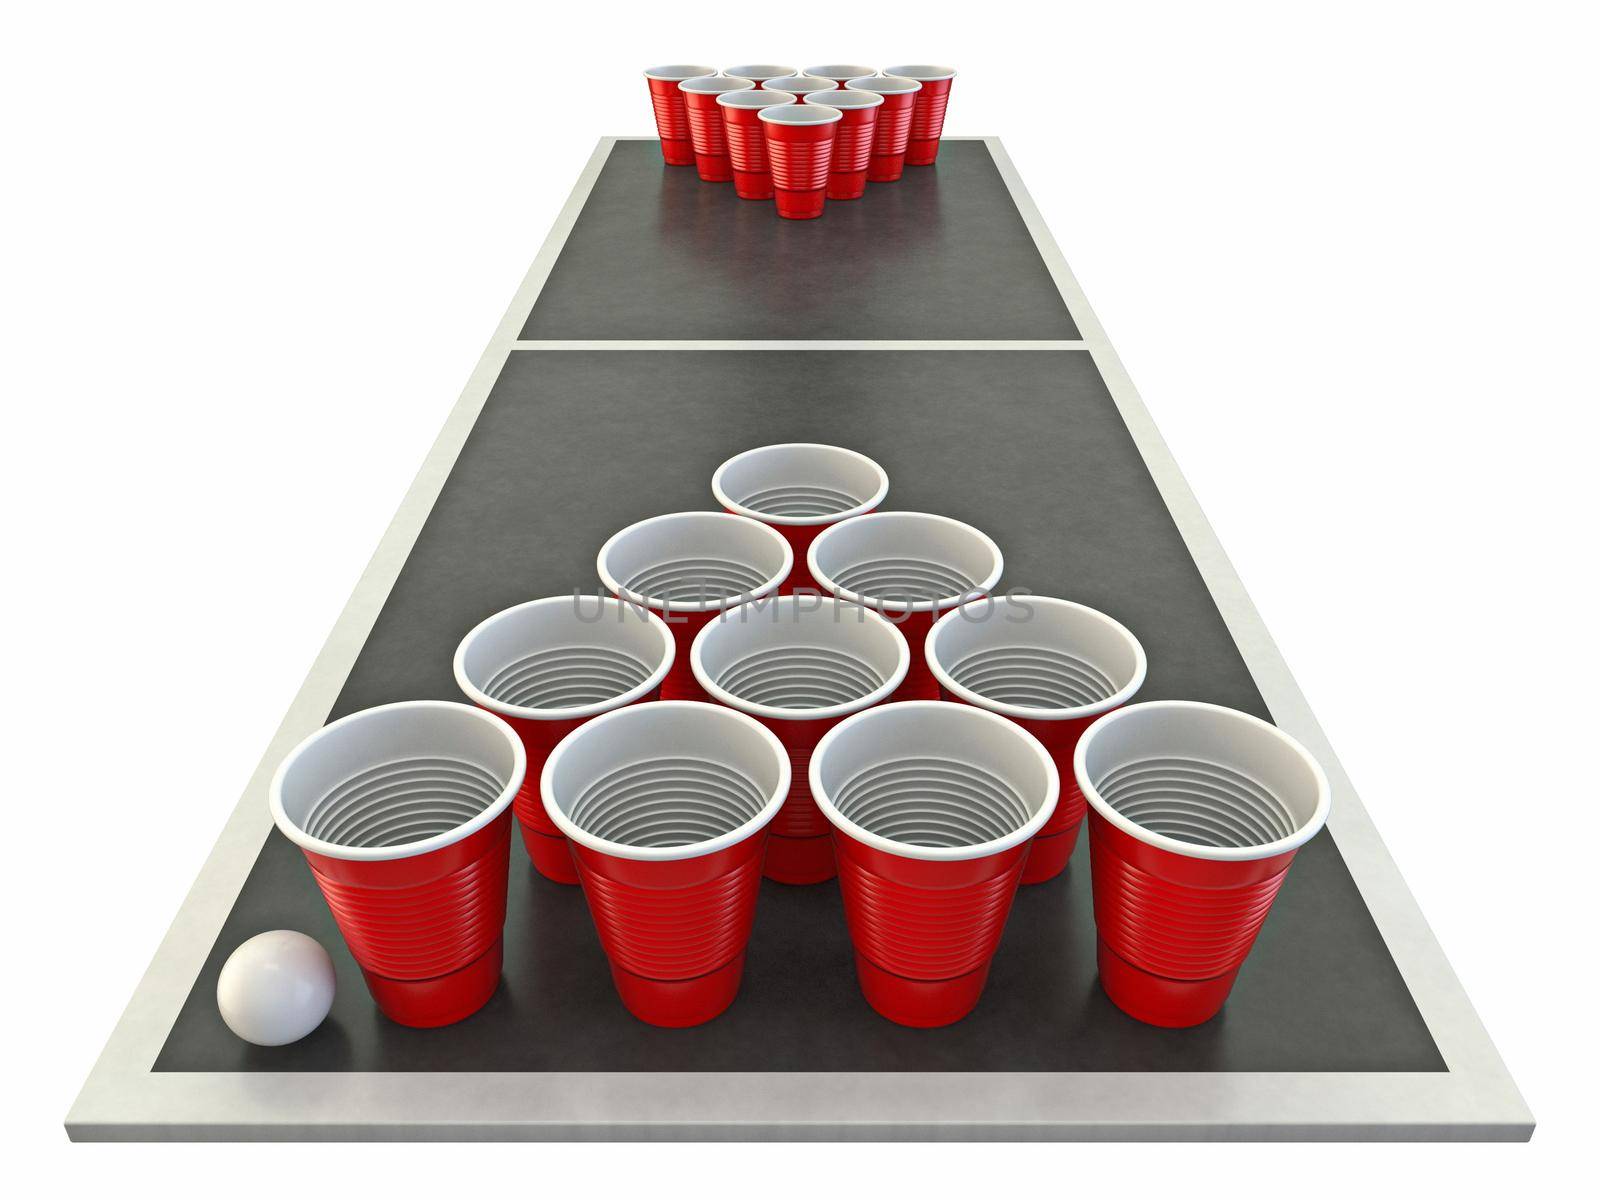 Beer pong table Front view 3D render illustration isolated on white background